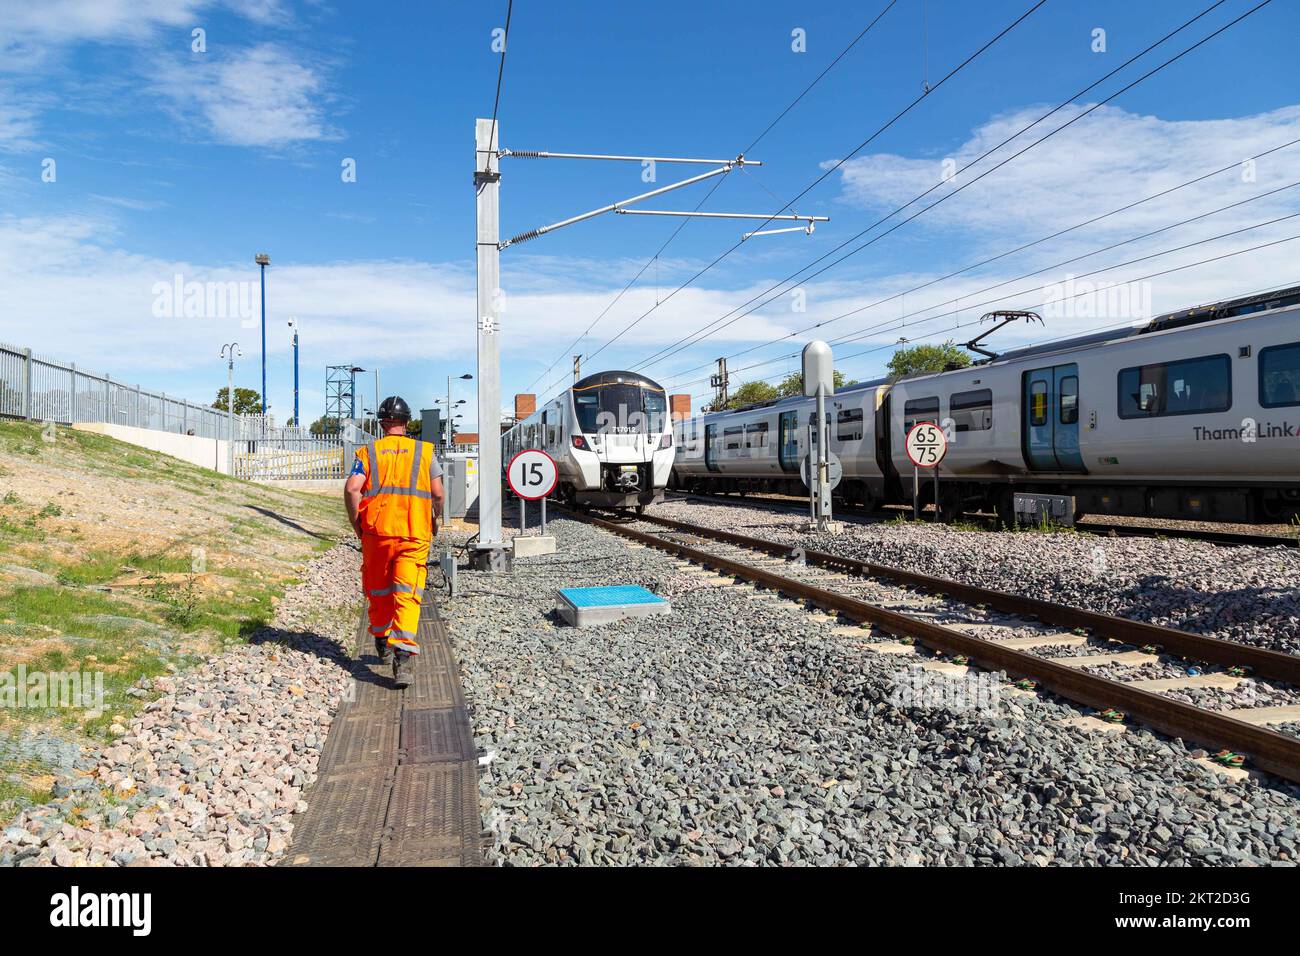 Railway worker inspecting sidings on new railway track with trains Stock Photo